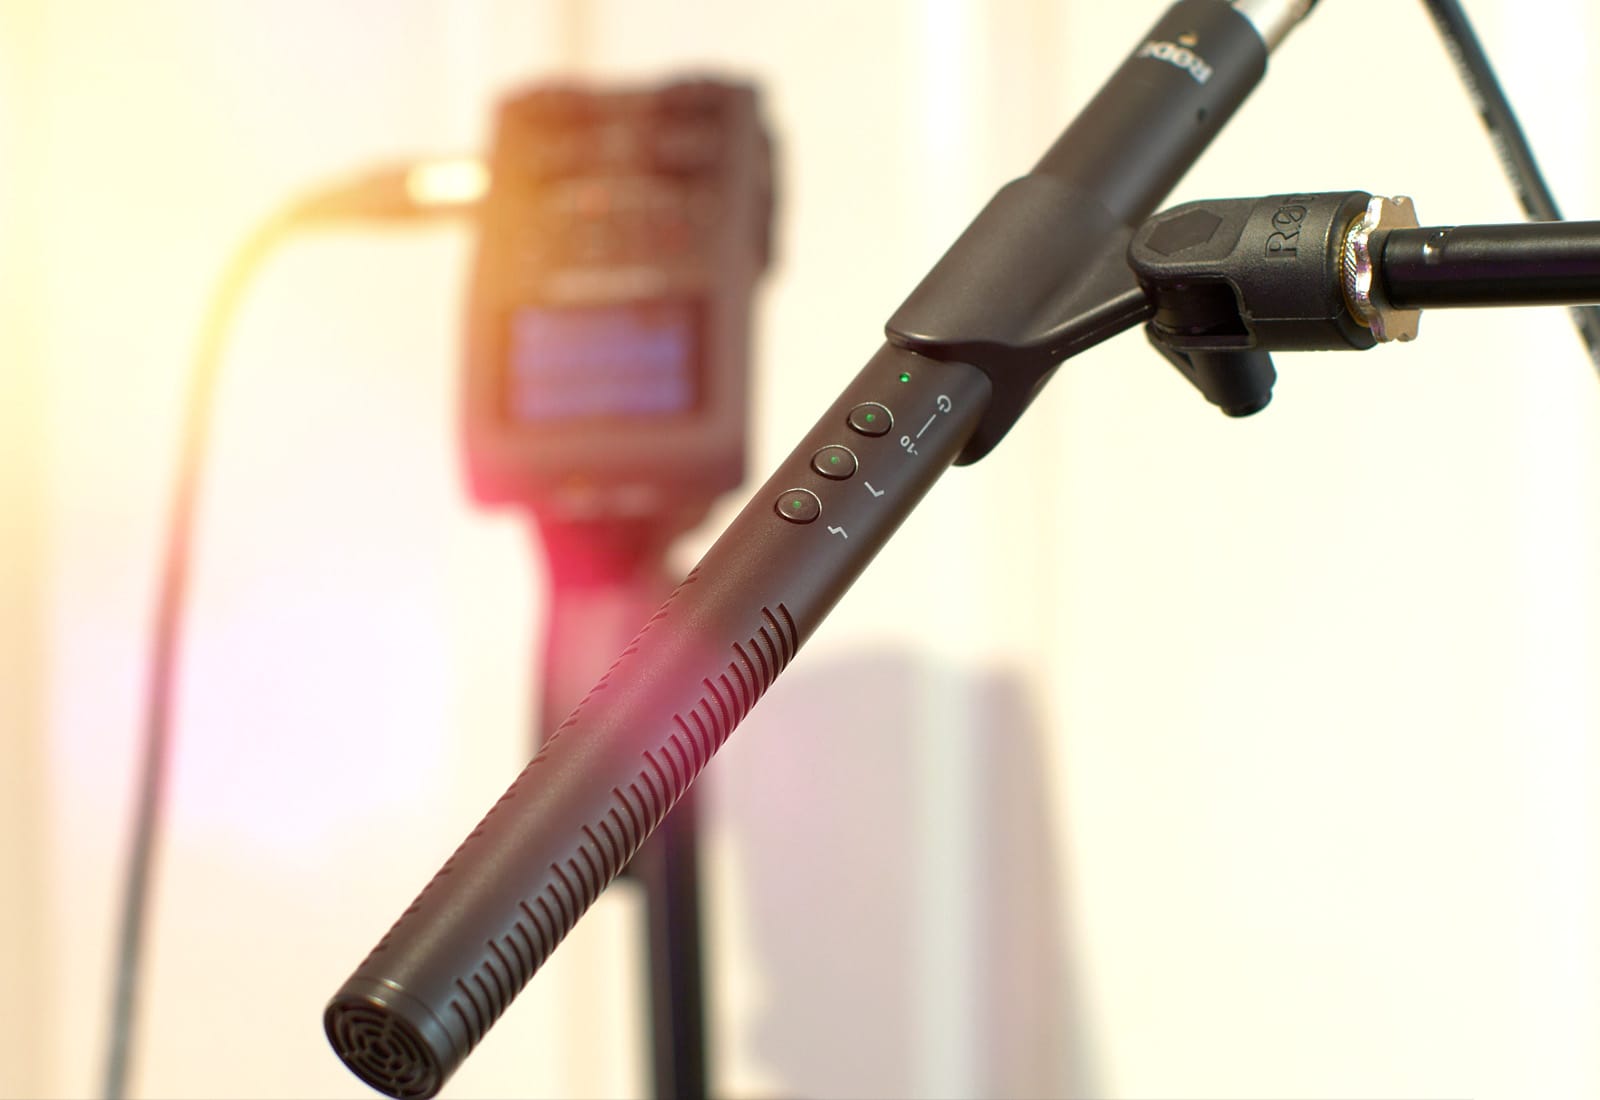 The Rode NTG4+ microphone makes our YouTube videos sound super-crispy.